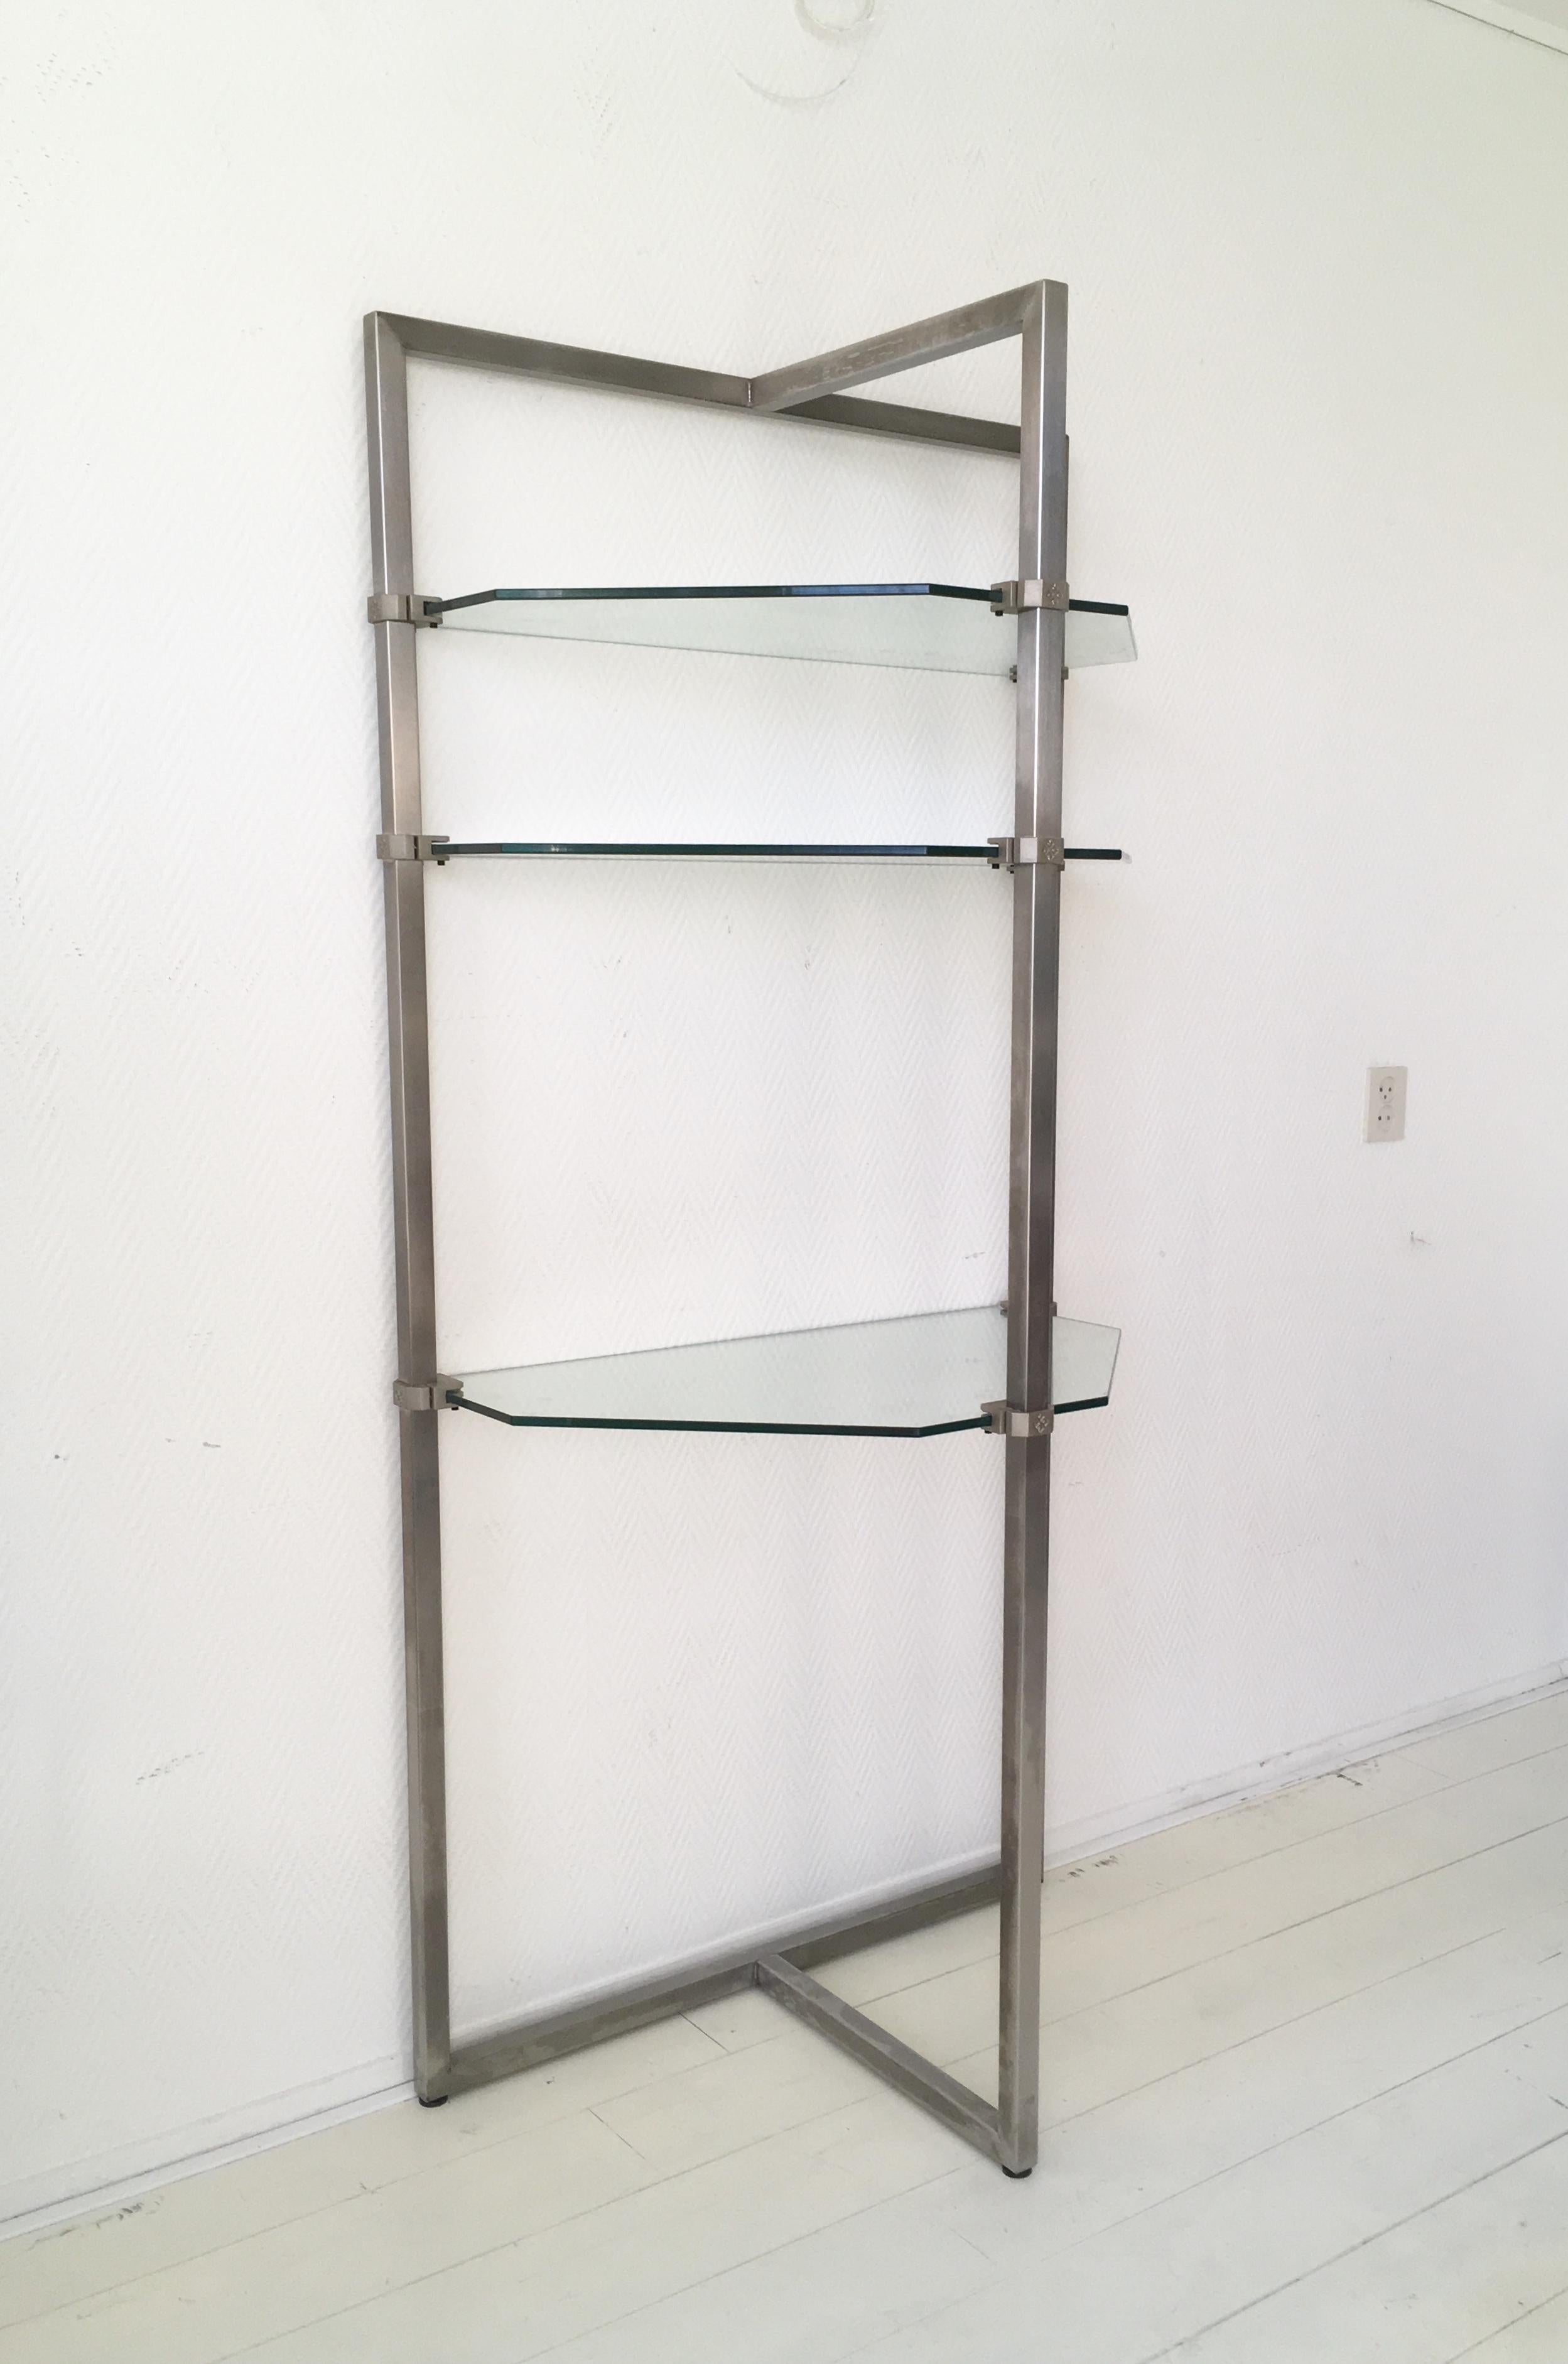 A stainless steel frame constructed of 3 × 3 cm stainless steel tubing holds brackets for glass shelves that may be placed at any height. The brackets were sand cast. The 10 mm glass plates were finished in clear glass. Each glass plate floats